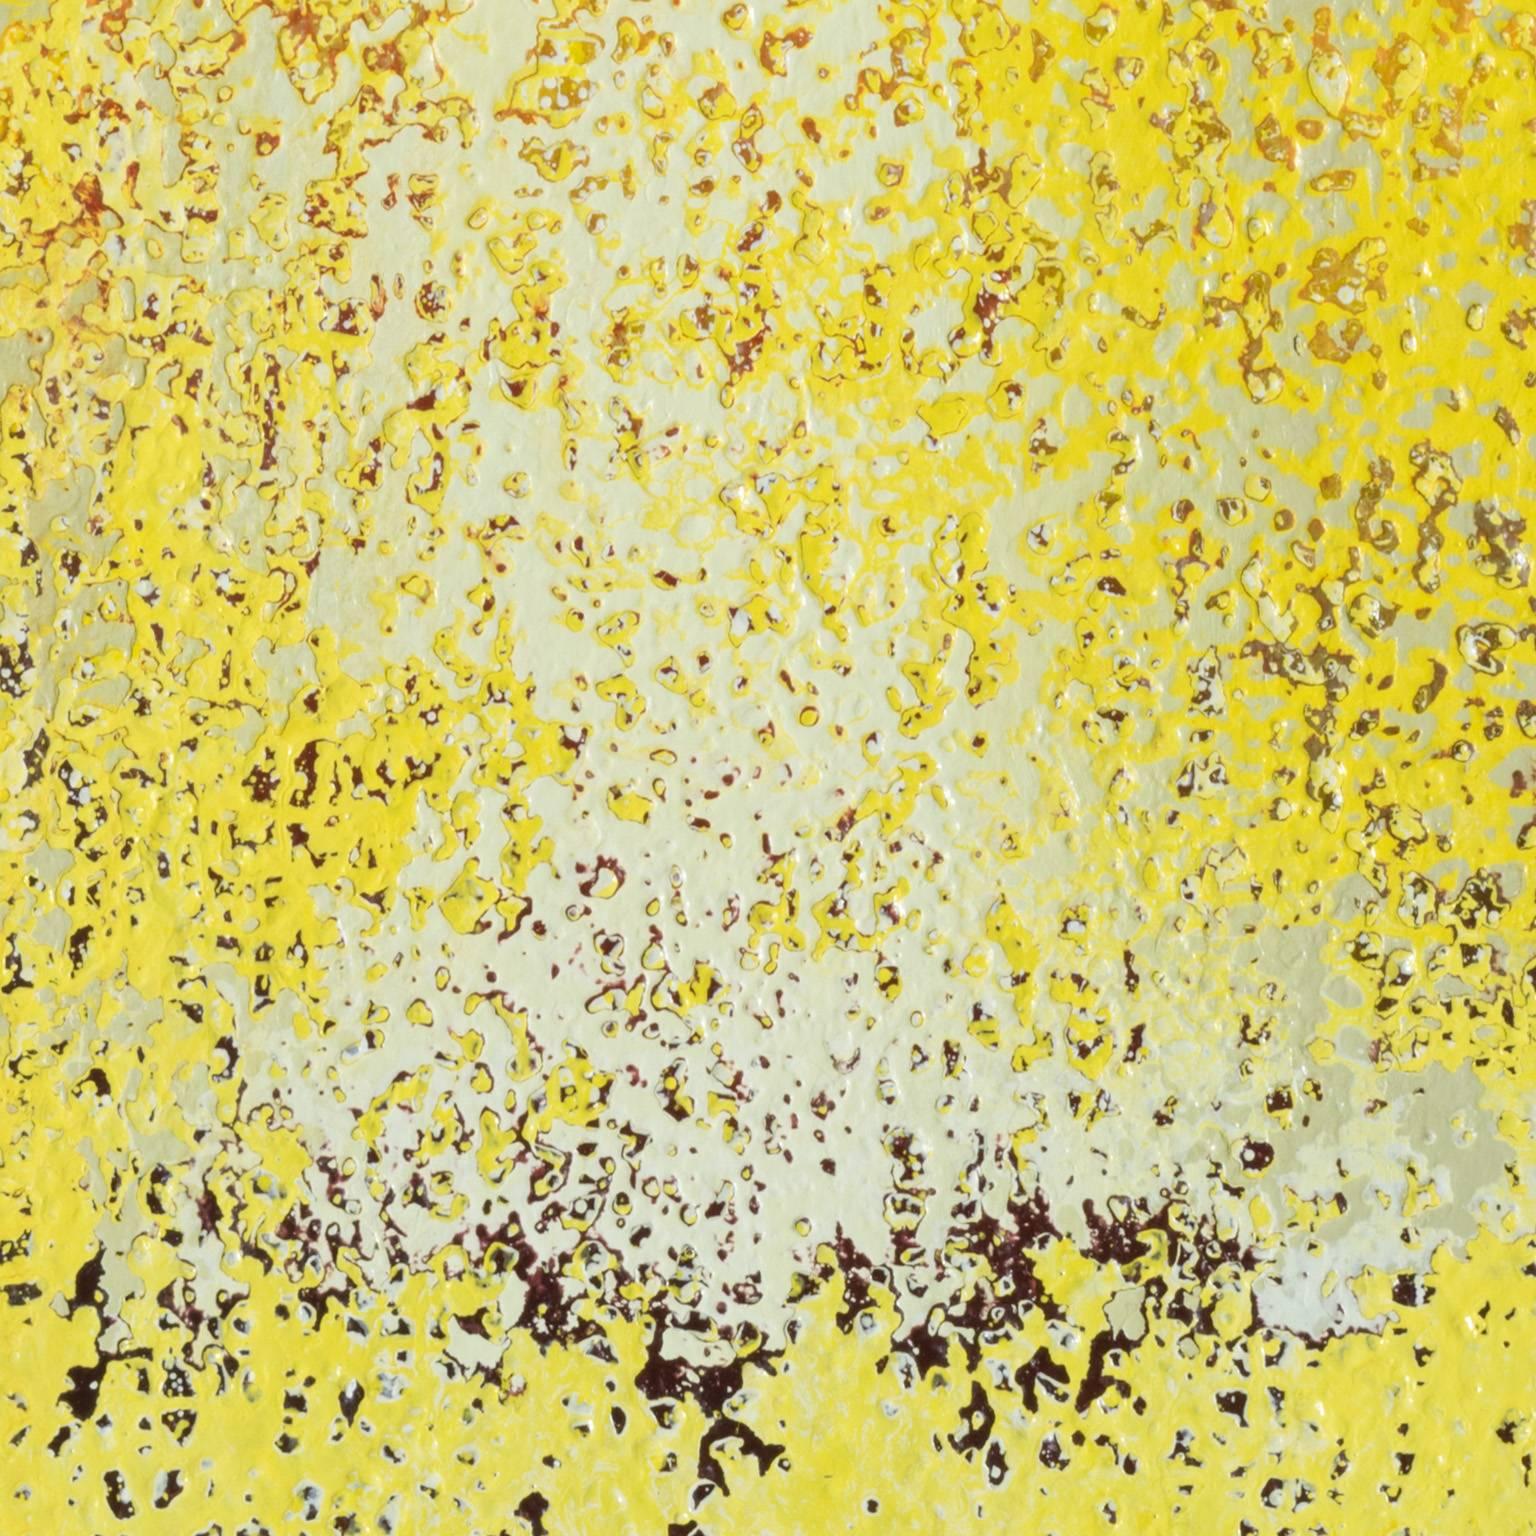 Heidi Thompson is known for her poetic canvases where color and light create abstractions reminiscent of nature and natural phenomena. Drippings of colors that up-close could be compared to Jackson Pollock's frantic painting technique are instead